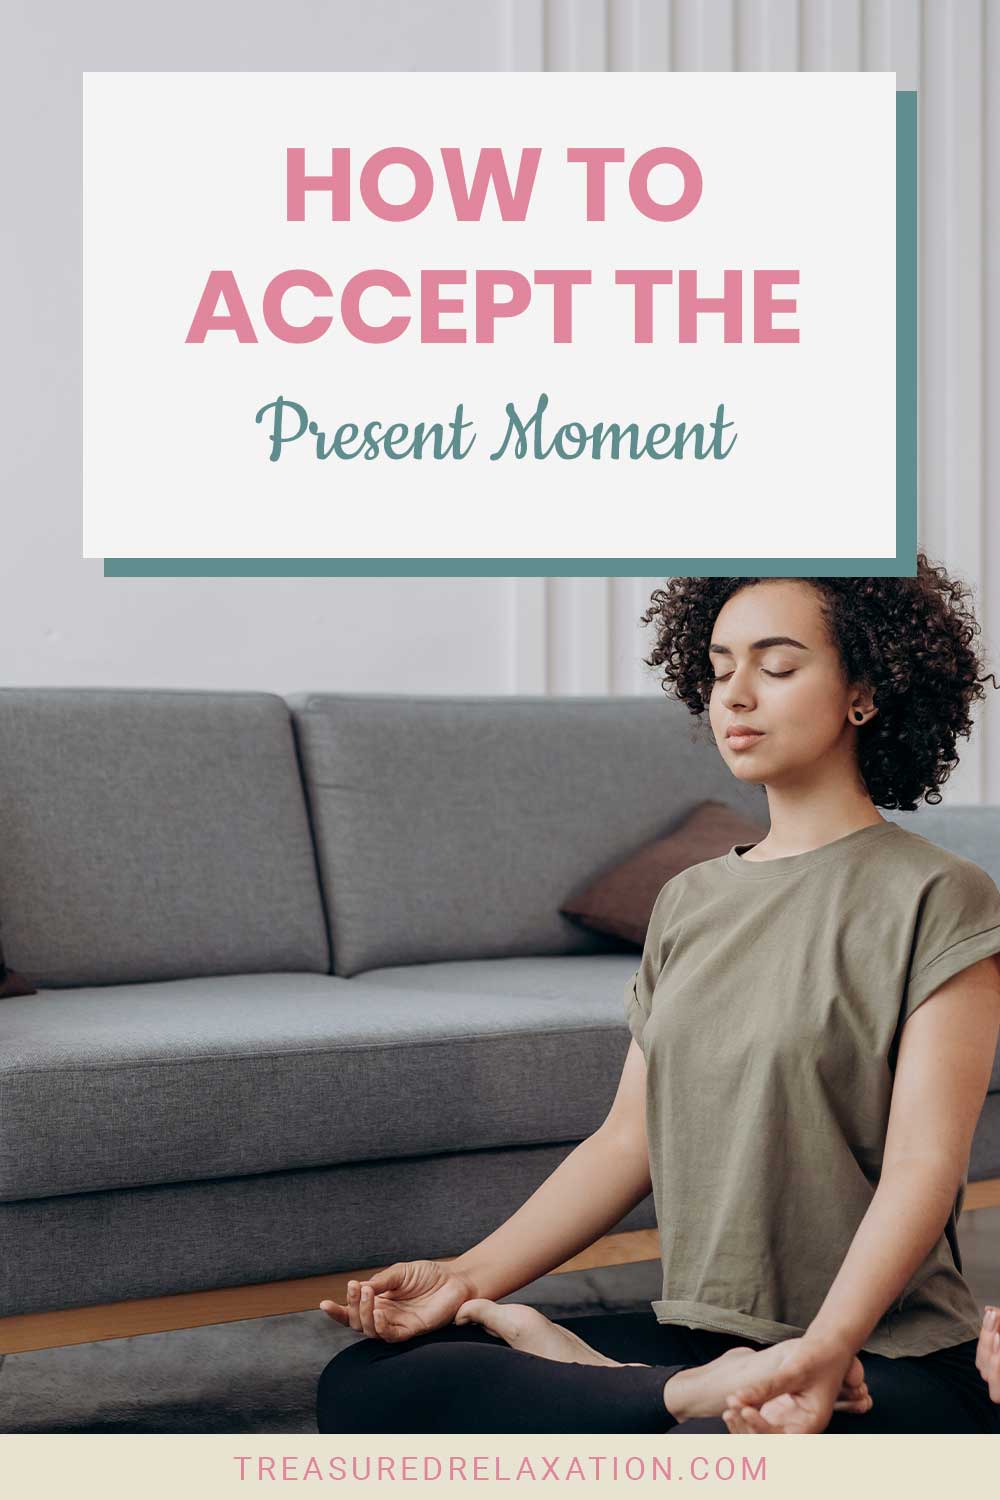 How to Accept the Present Moment